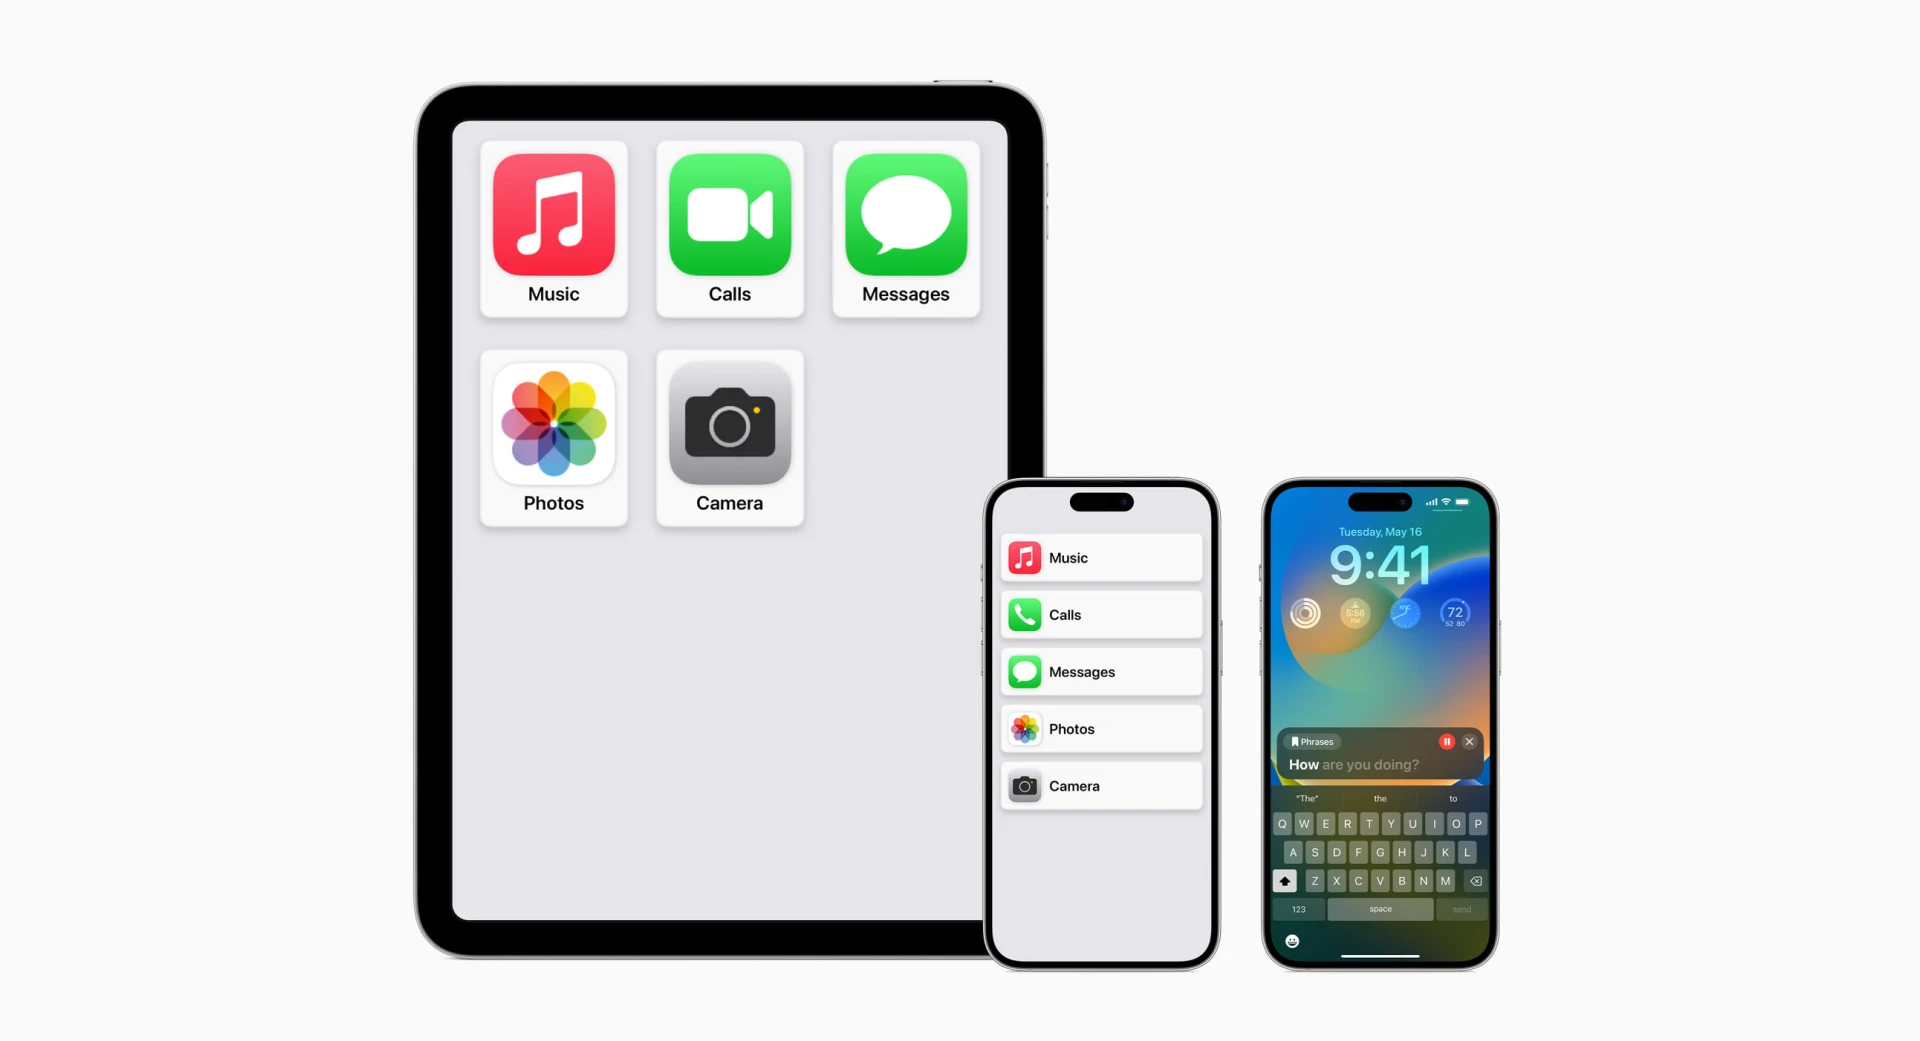 An iPad and two iPhones are shown with large icons for 'Music', 'Calls, 'Messages', and more shown on the devices